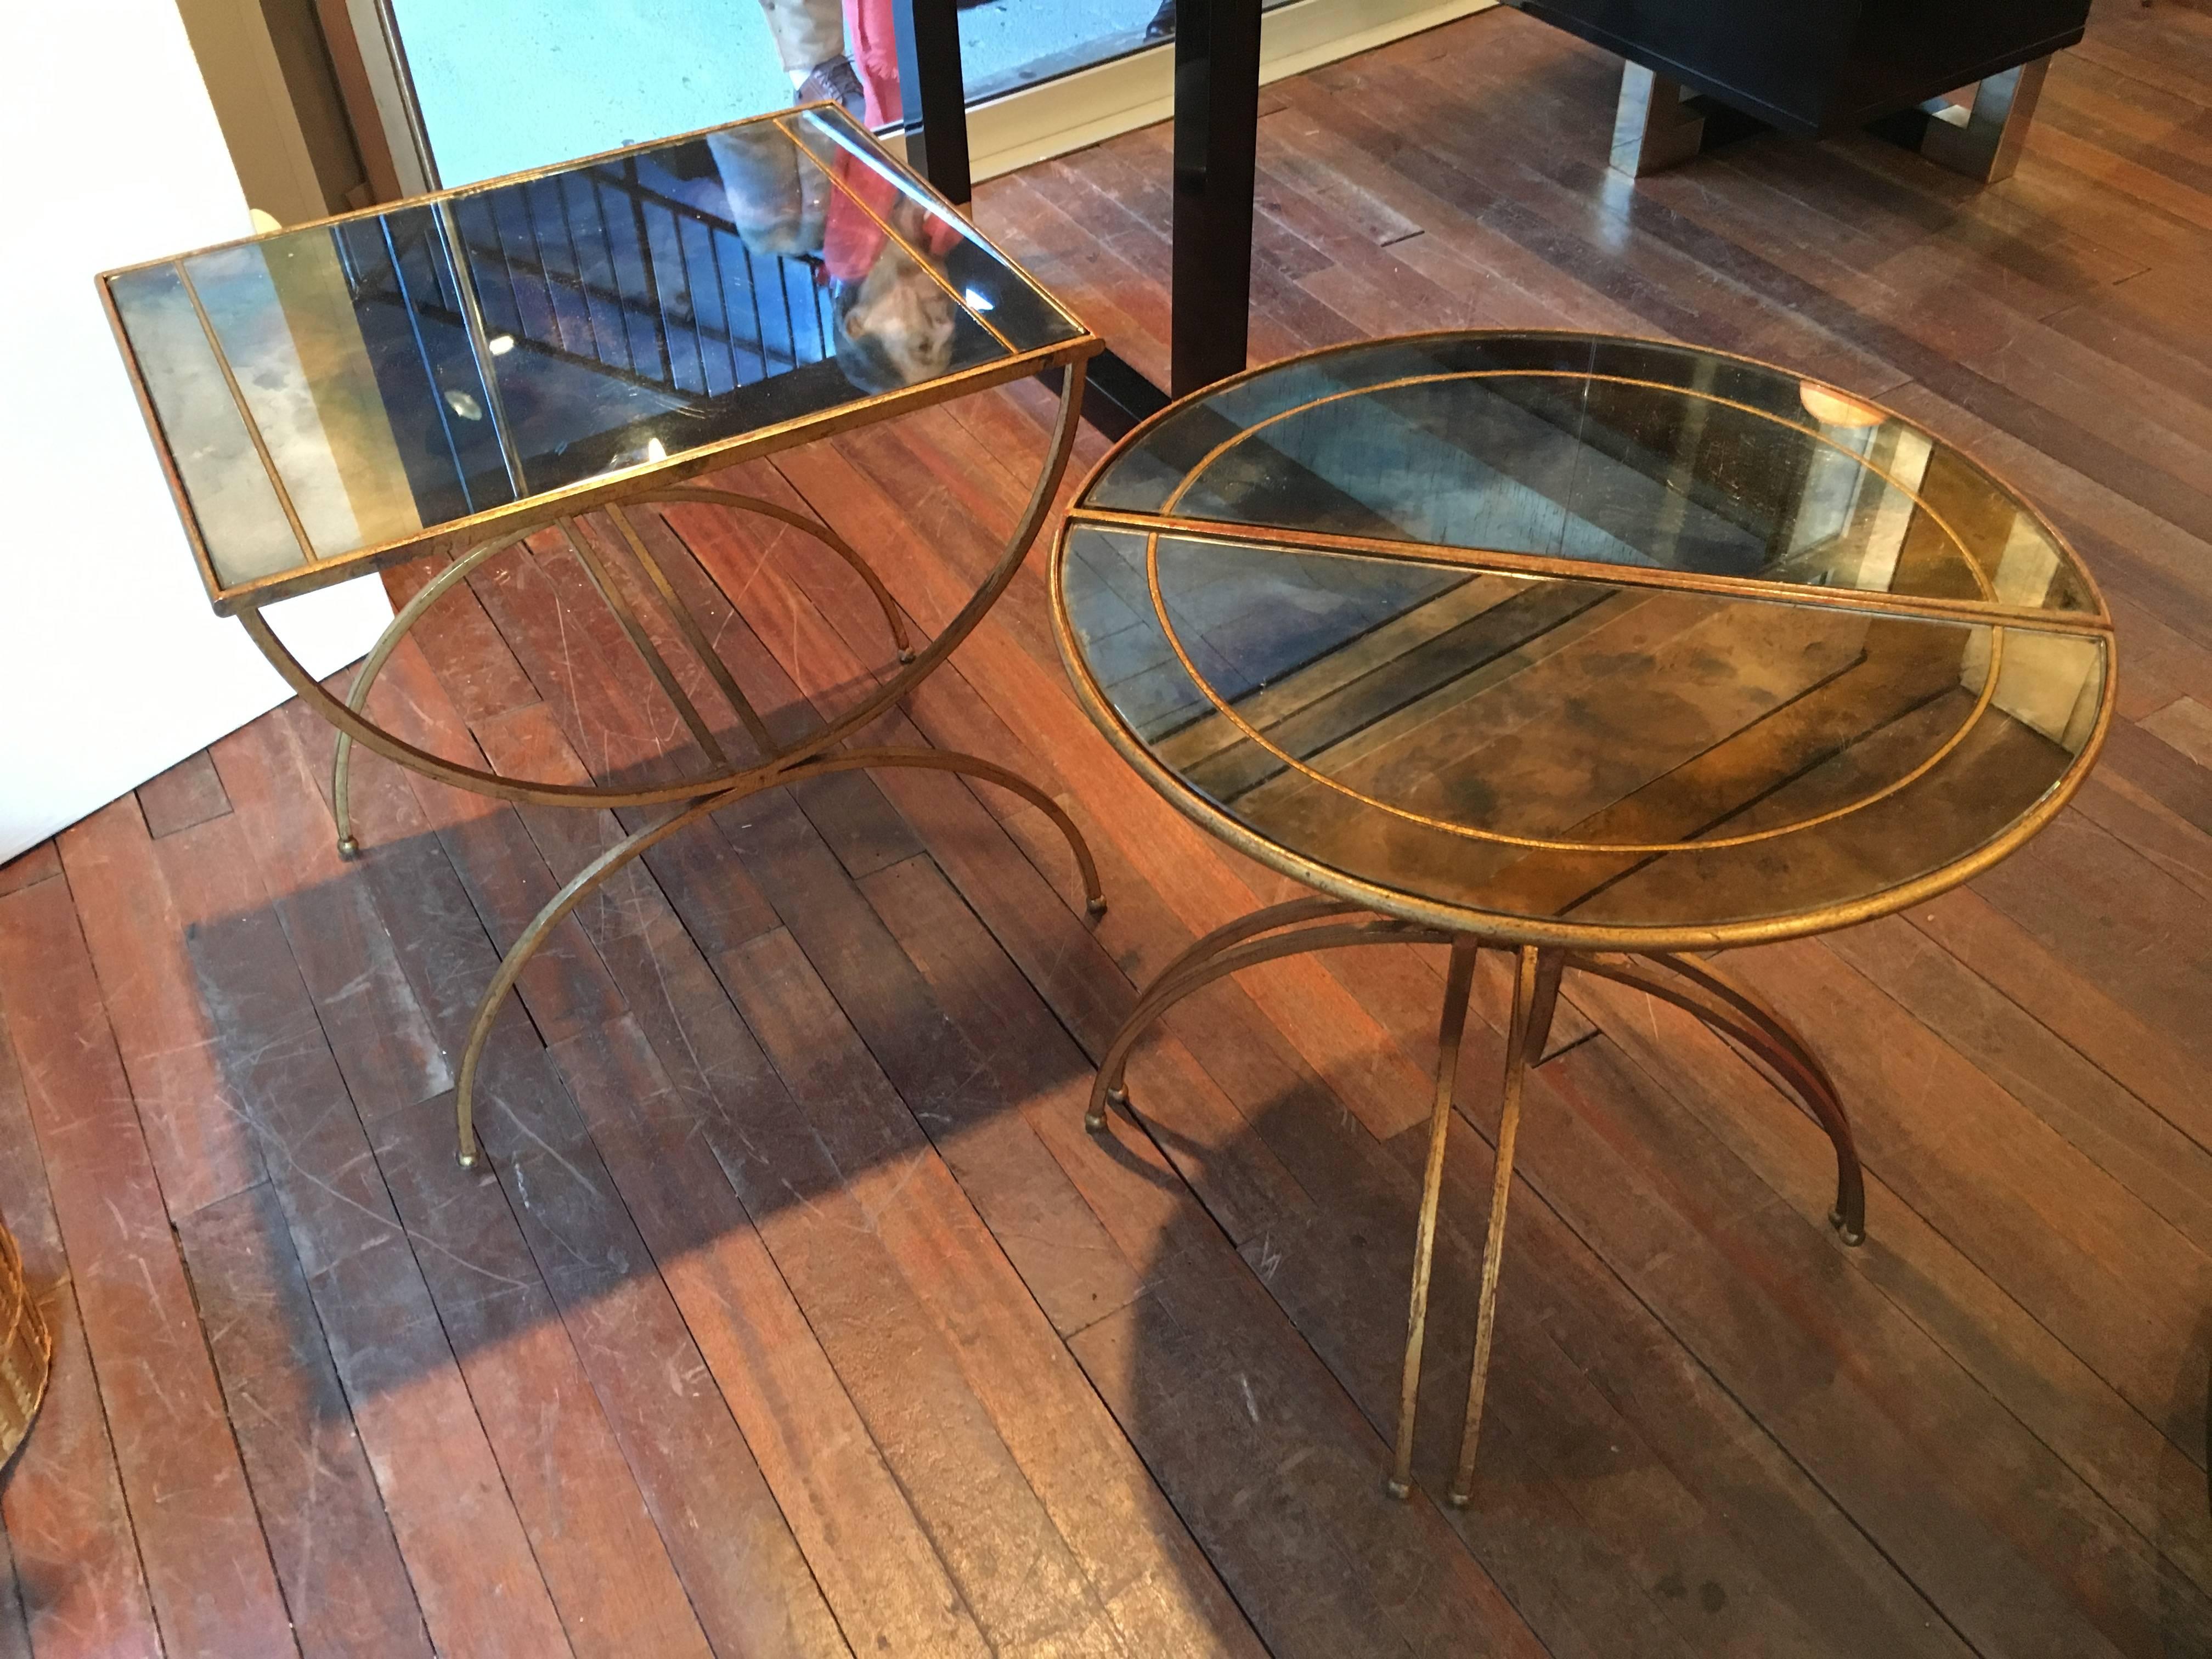 Maison Baguès Semi-Sphere Gold Leaf Iron Three-Part Coffee Table In Excellent Condition For Sale In Paris, ile de france